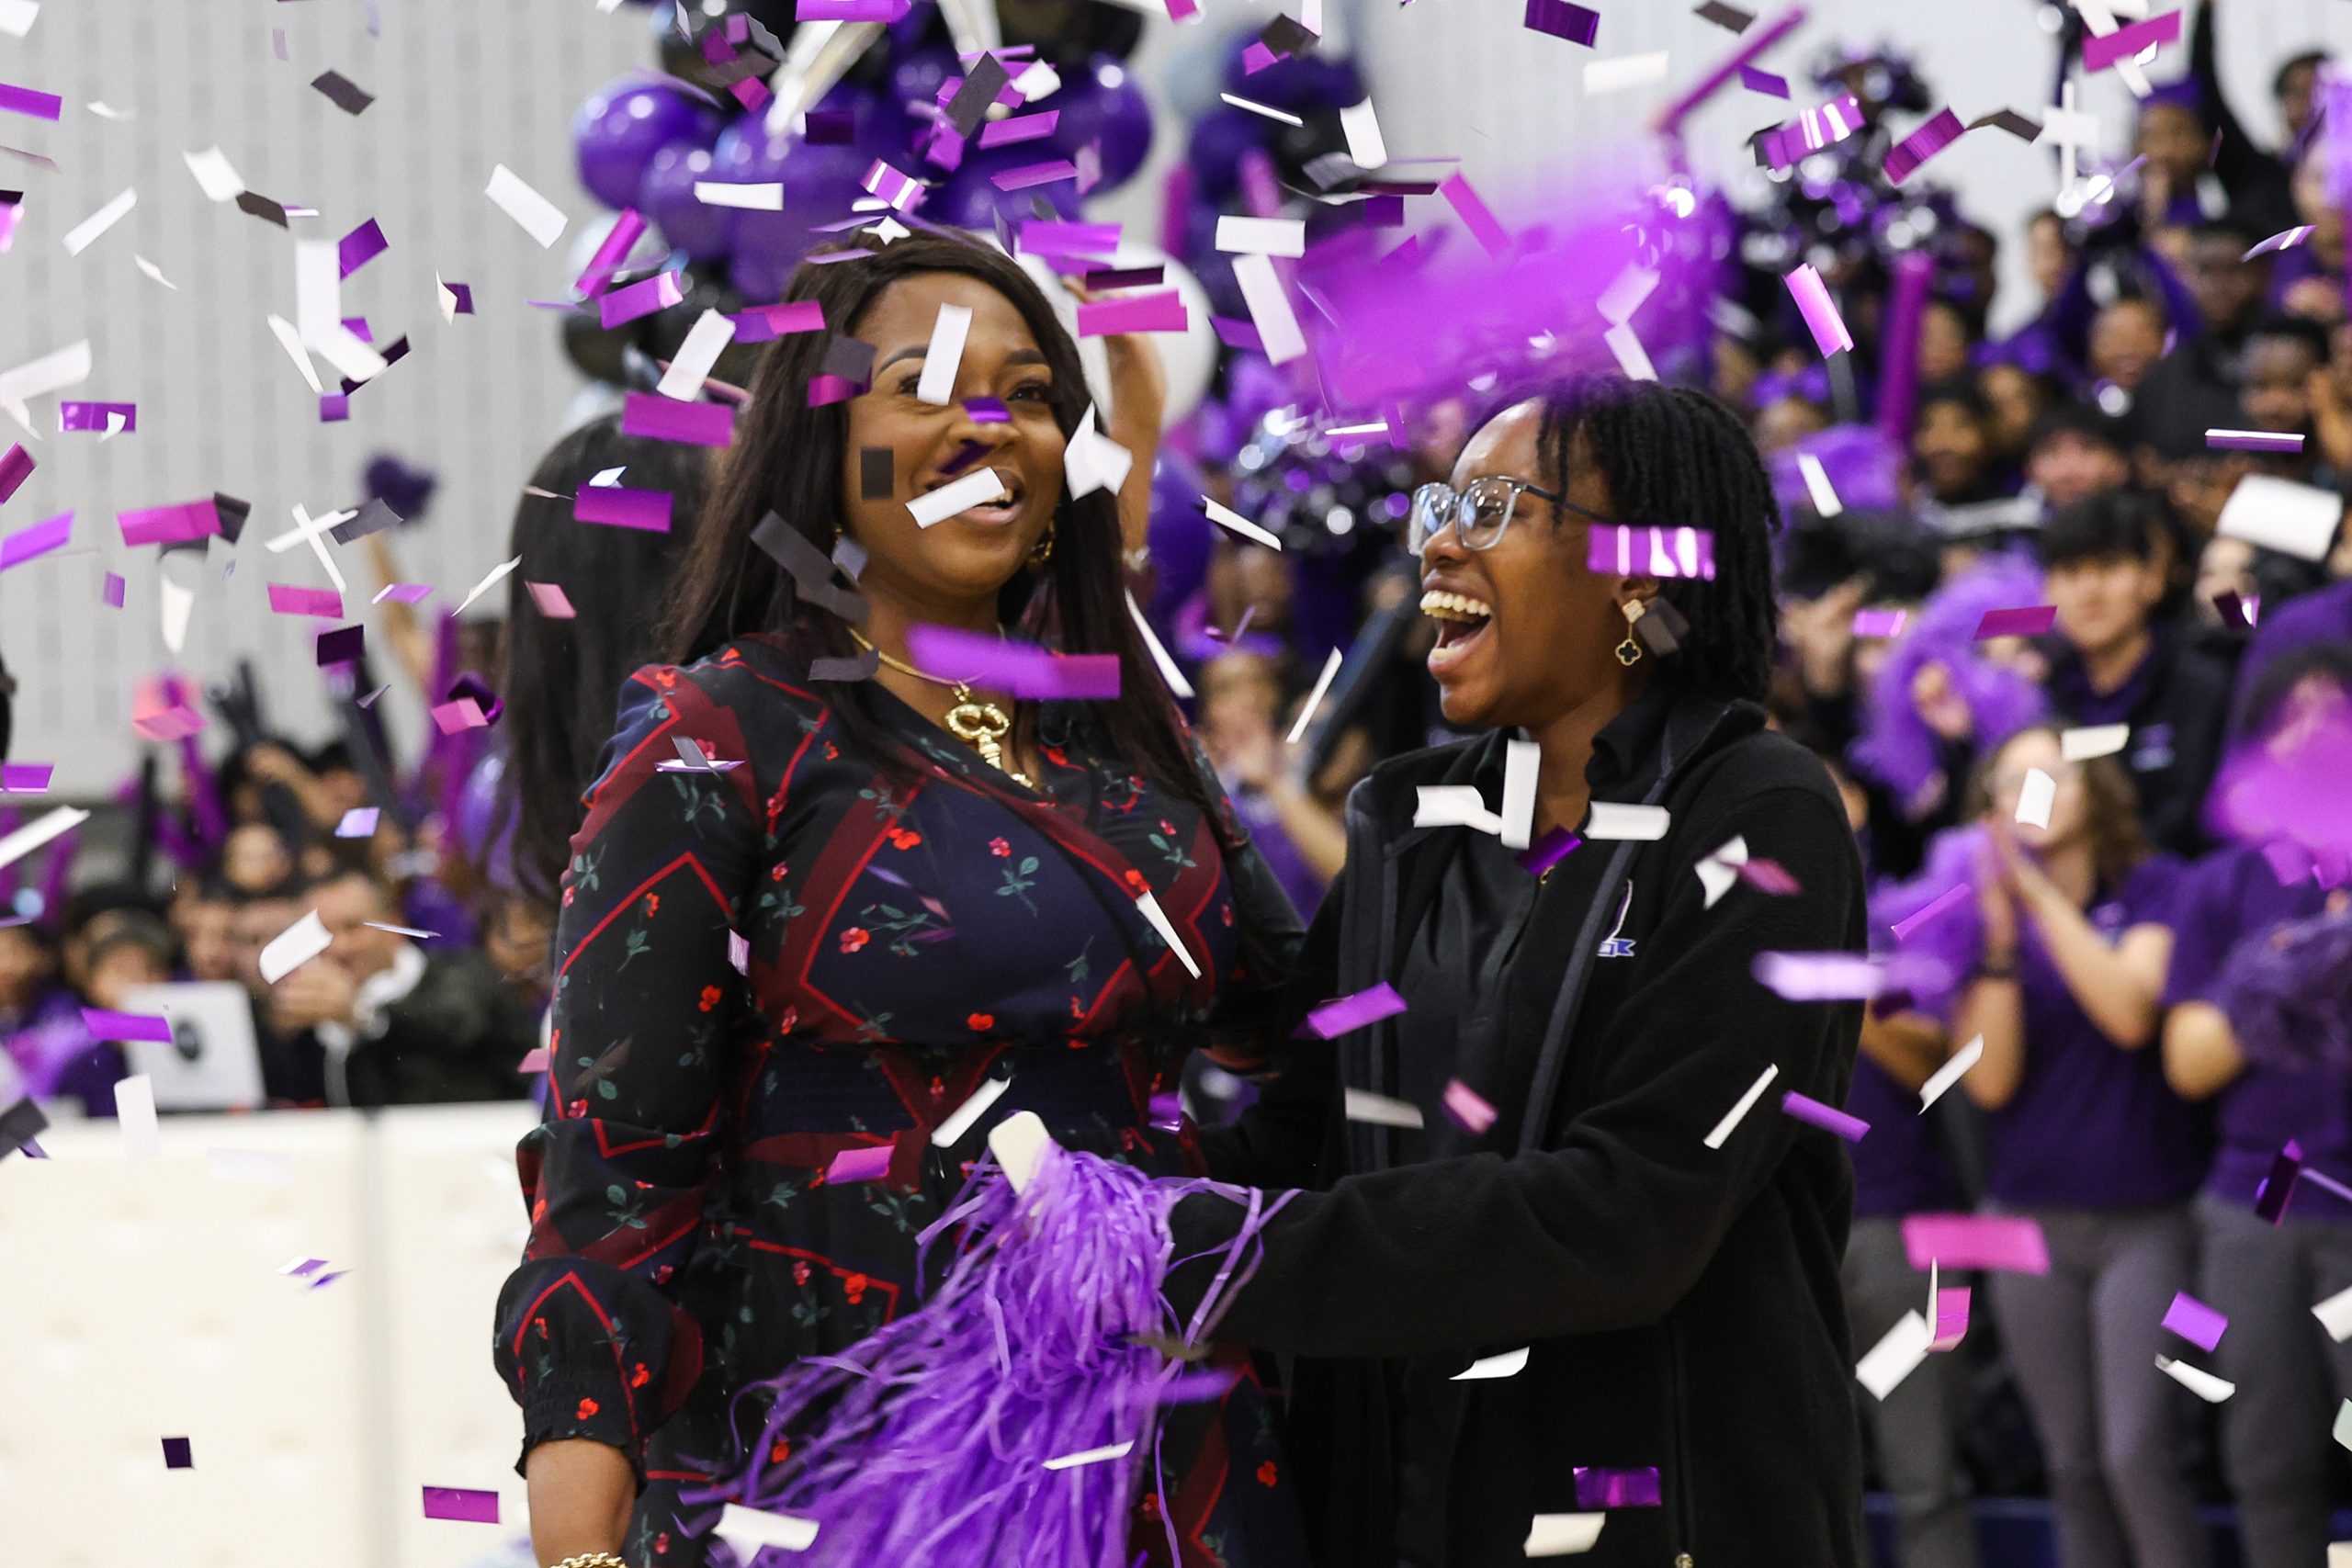 Flanked by her mother amid a sea of confetti, Mosope Aina, an aspiring neurosurgeon, was surprised by Mickey Mouse and Disney Dreamers Academy executive champion Tracey Powell on national TV on January 13, 2023 at her school in Newark, N.J. with the news of her selection to Disney Dreamers Academy at Walt Disney World Resort in Florida. Disney Dreamers Academy in late March is a mentoring program hosted annually by Walt Disney World Resort that fosters the dreams of Black students and teens from underrepresented communities. (ABC/Michael Le Brecht II)  